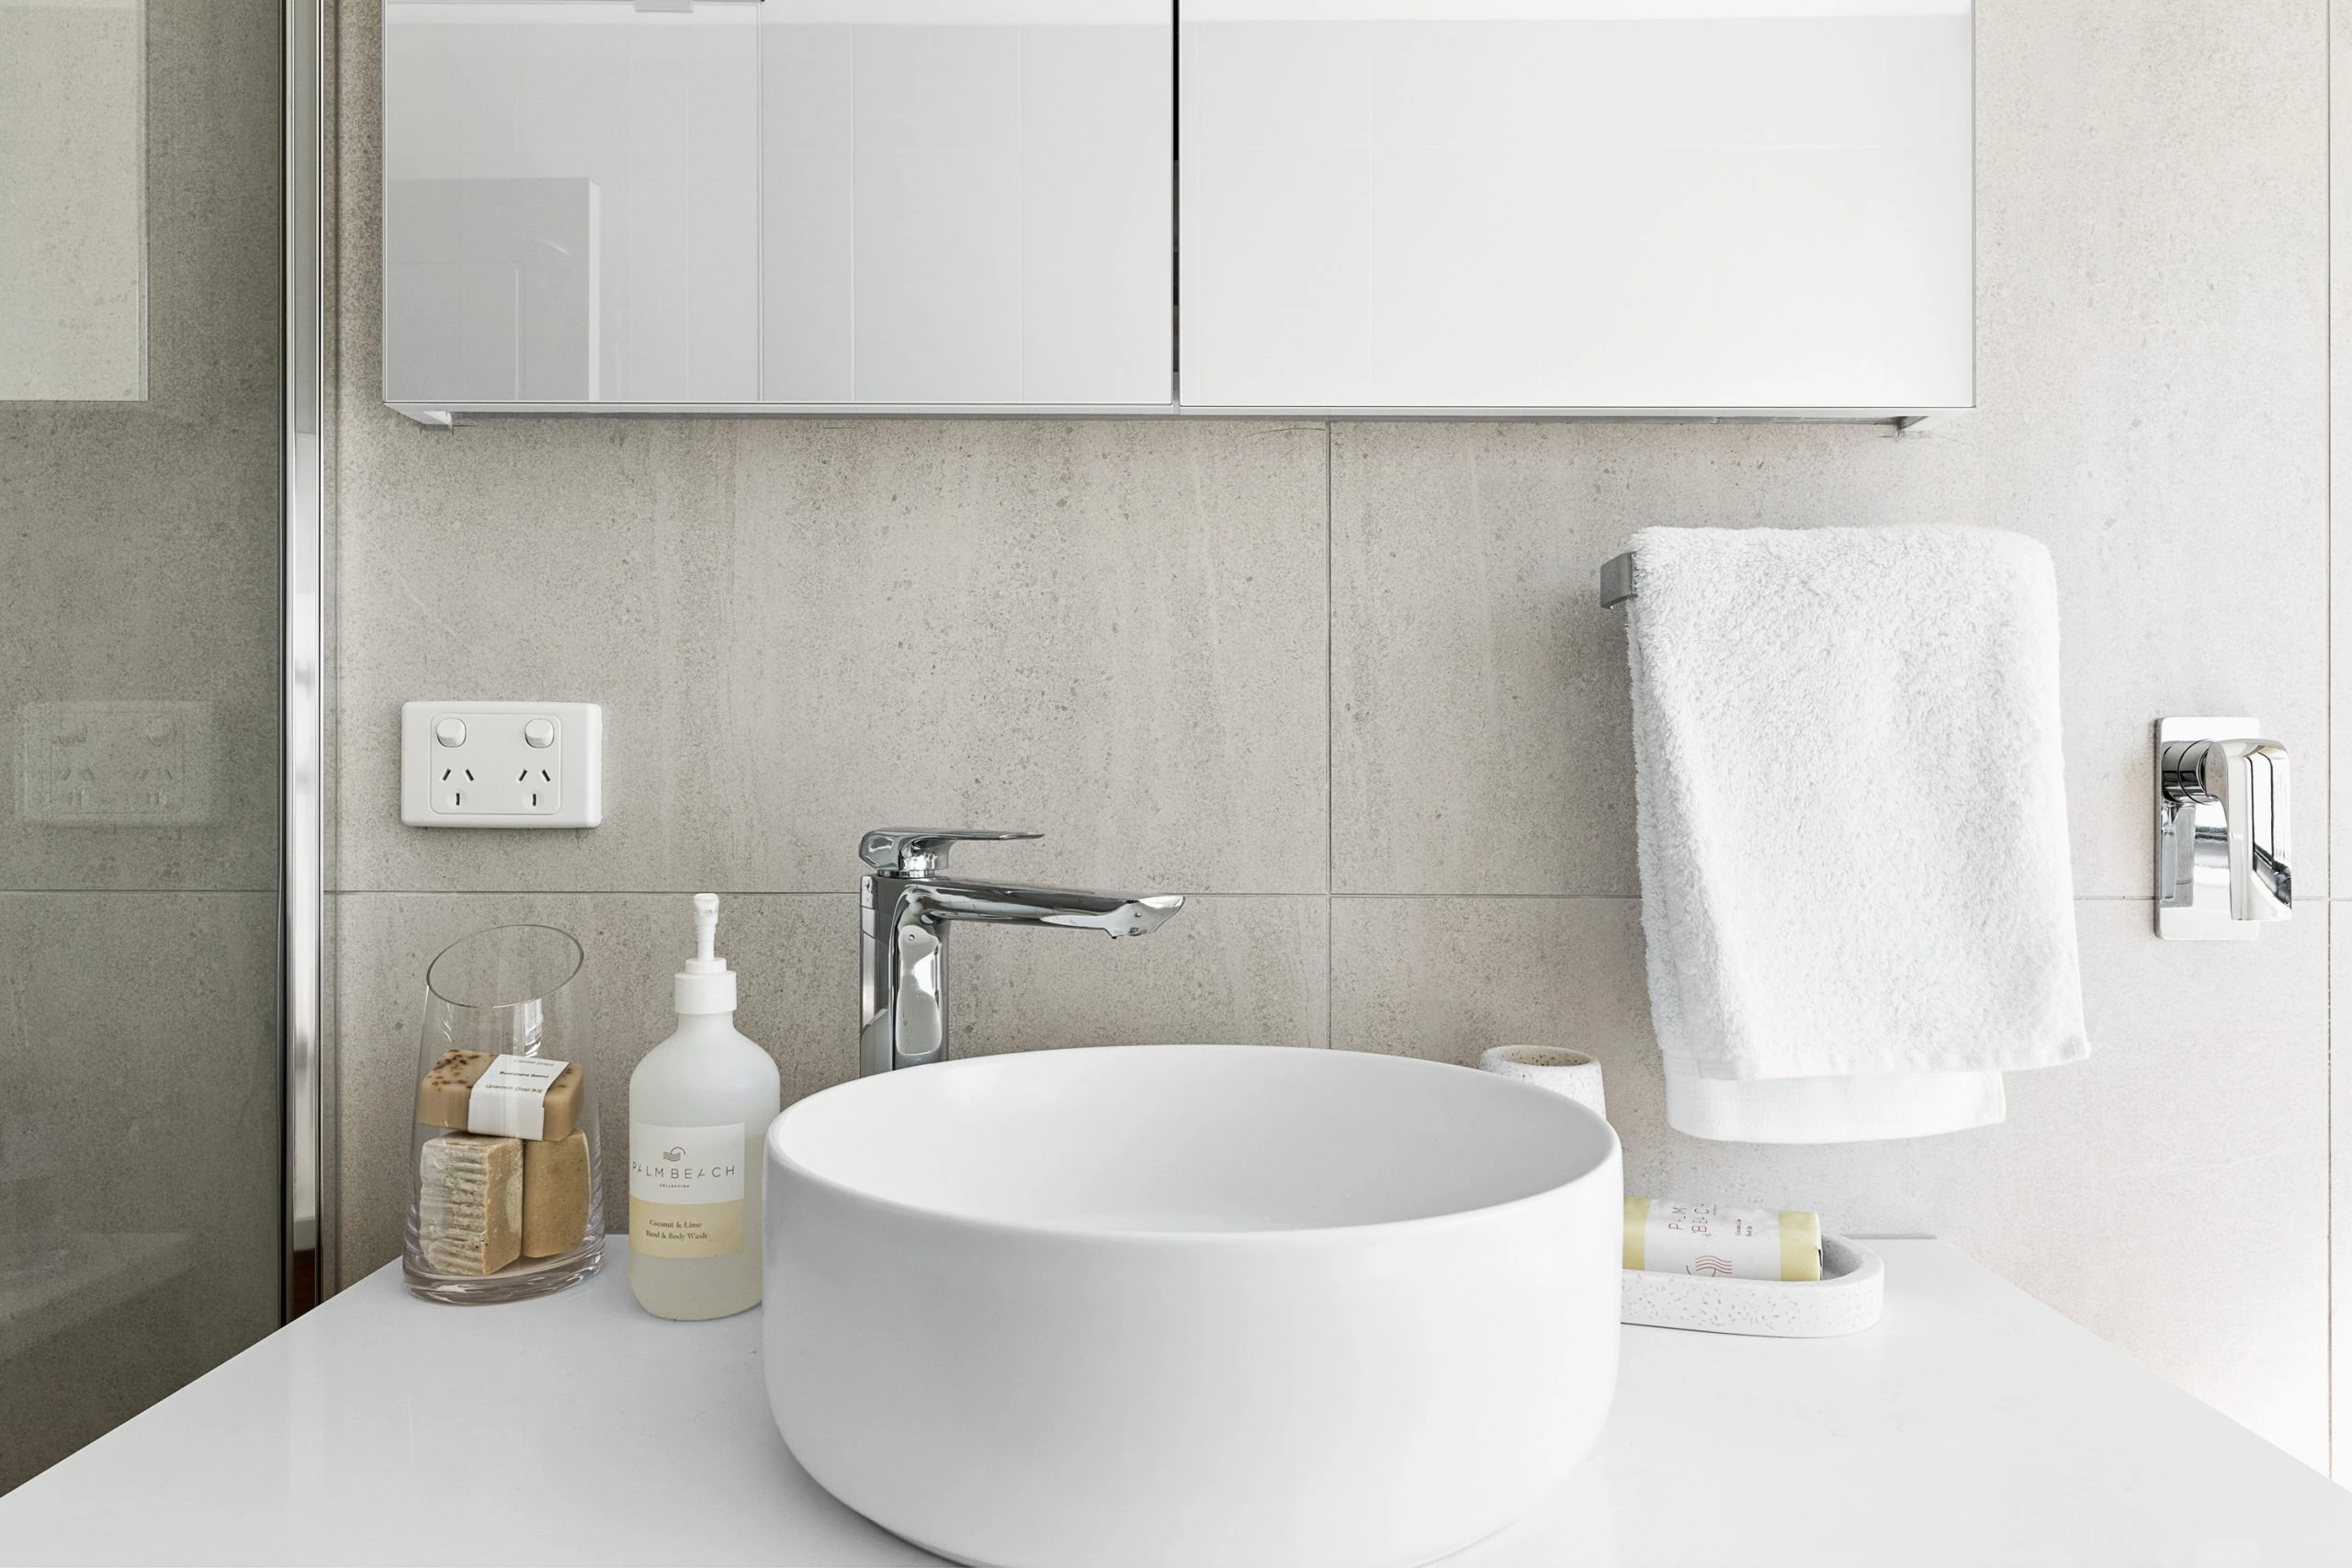 White sink with chrome tap in a modern, light bathroom